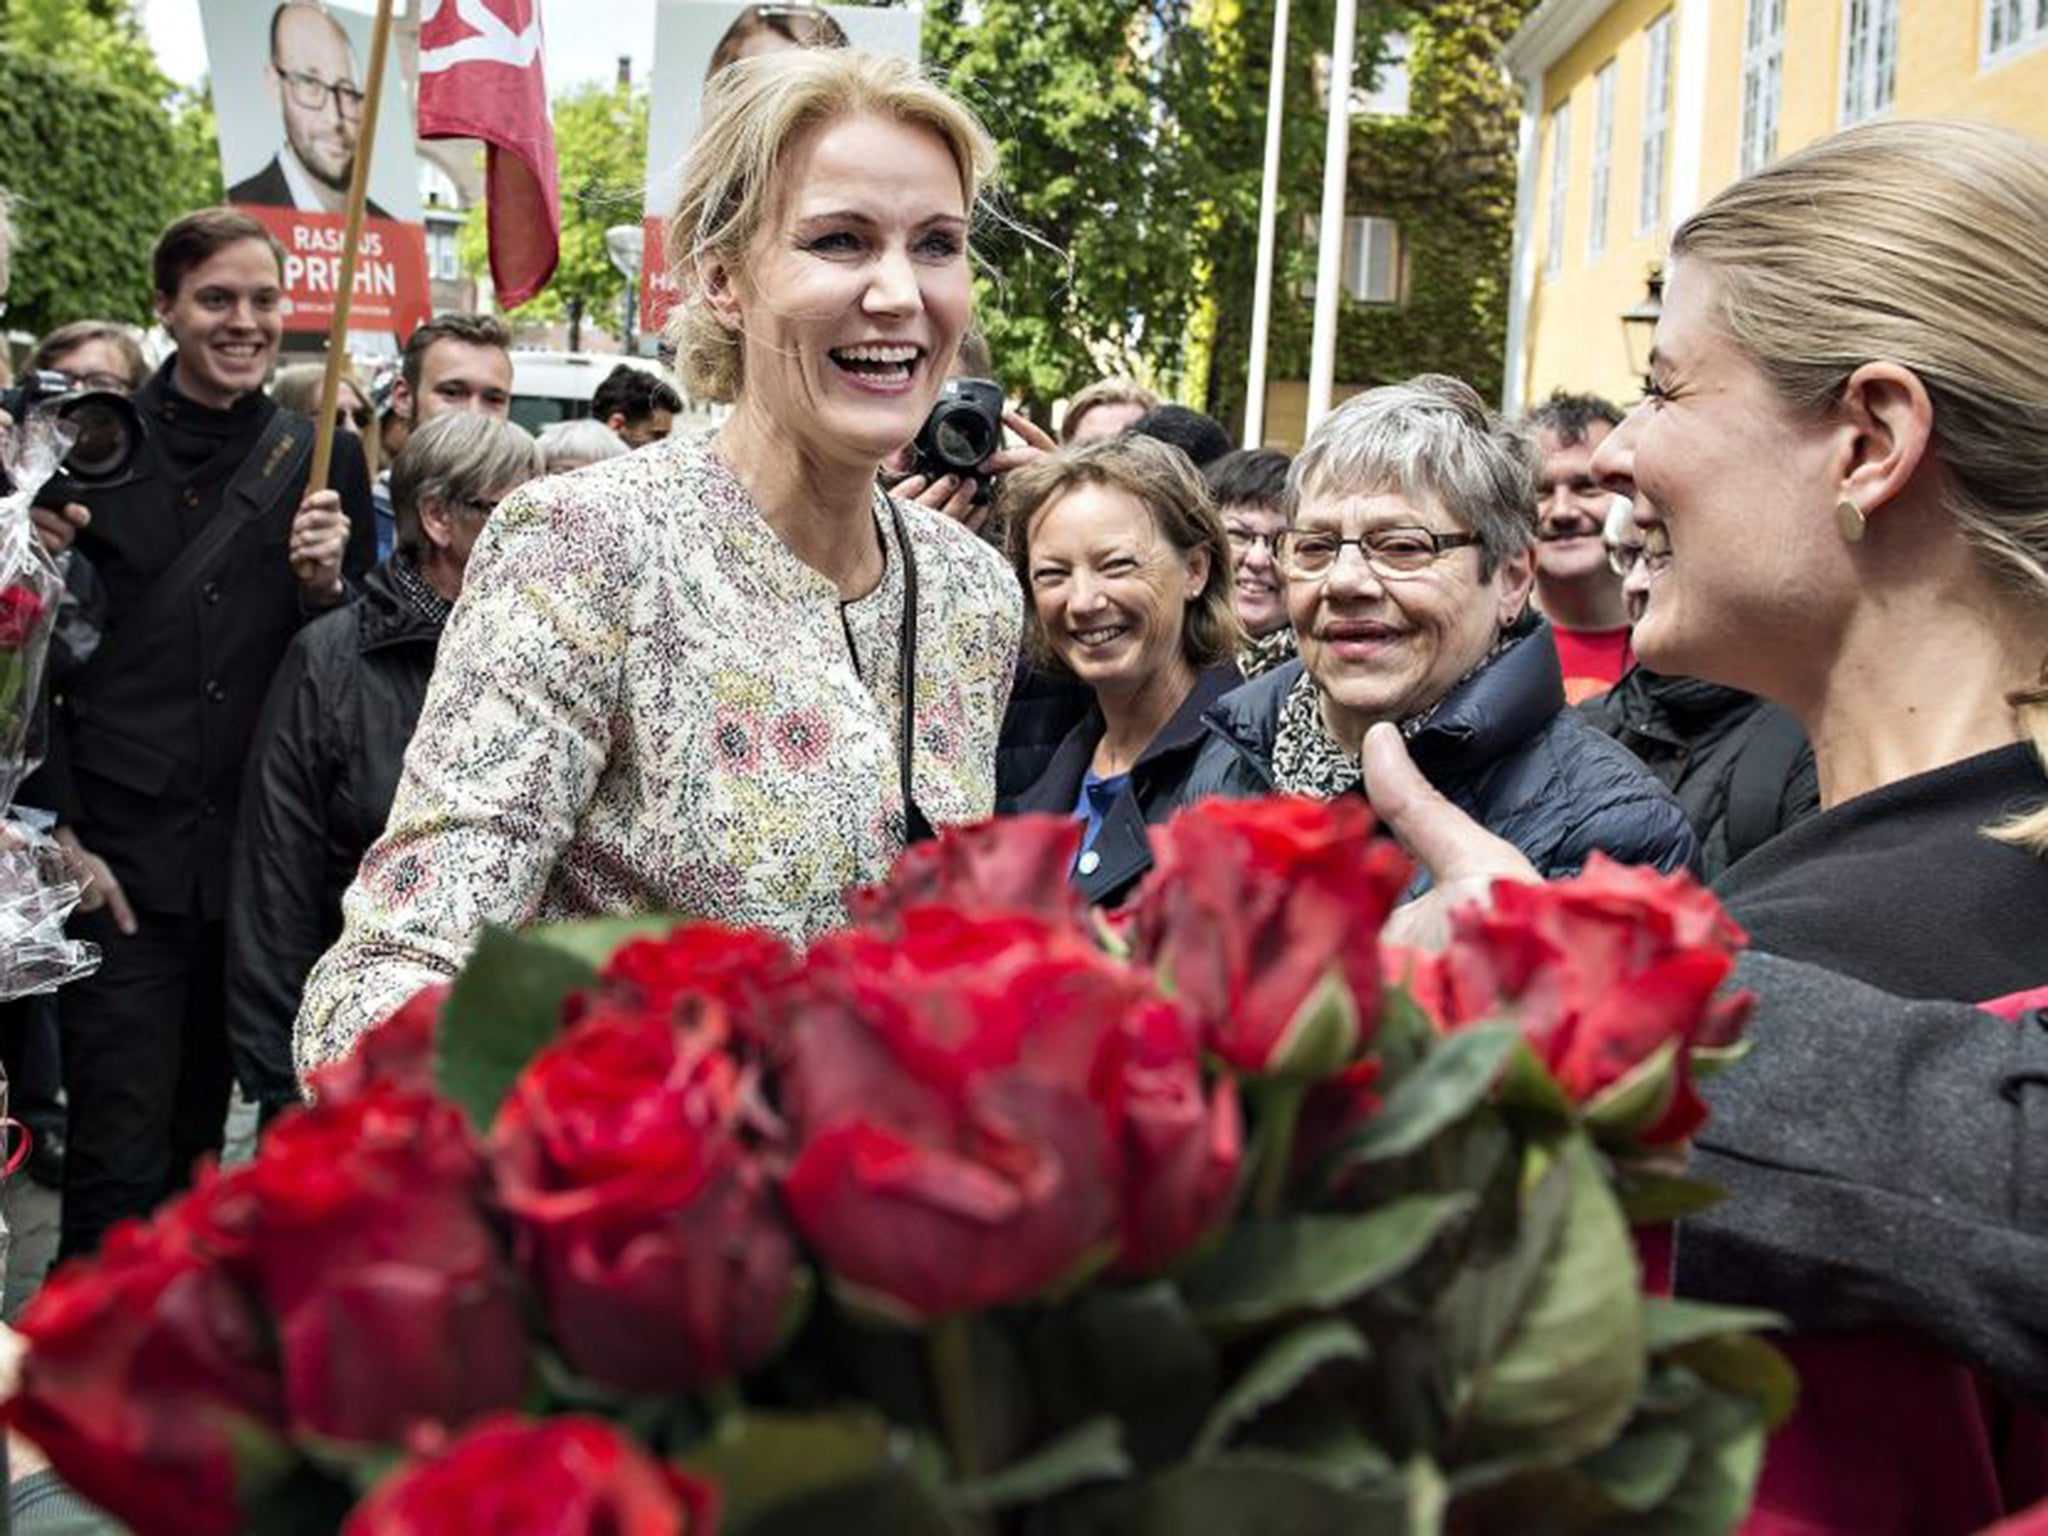 Danish Prime Minister Helle Thorning-Schmidt greets supporters holding red roses, the Social Democratic party’s symbol, at a campaign stop in Aalborg